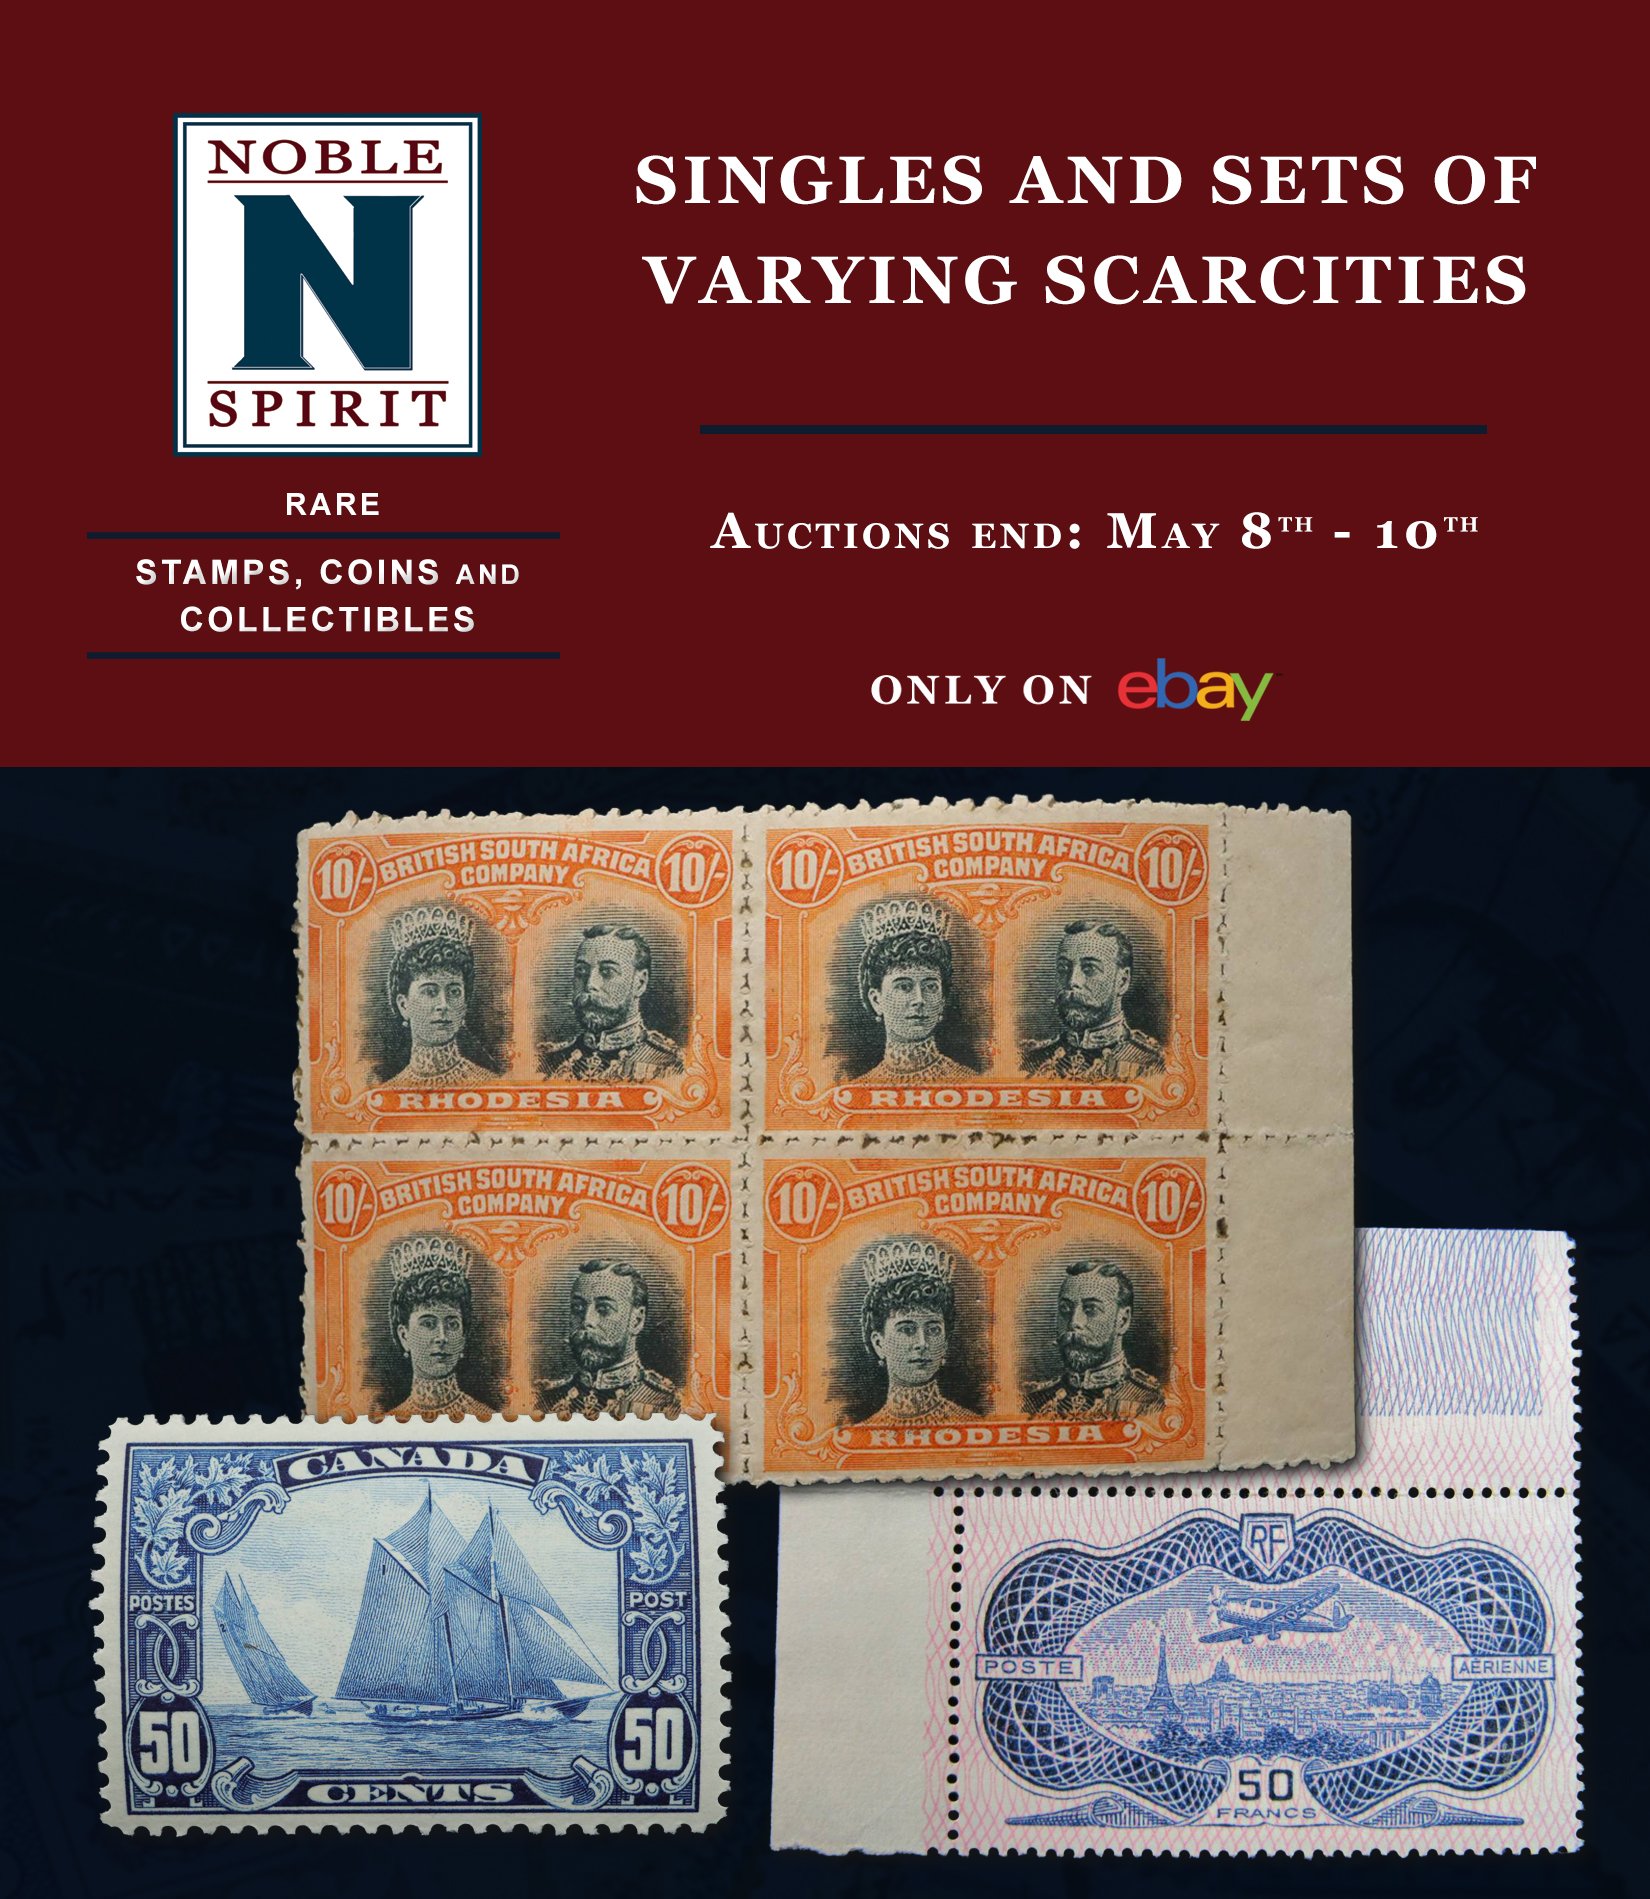 Our singles and sets of varying scarcities sale starts ending next week! 

View the catalogue and bid: https://app.usemeridian.com/catalogs/catalog/53